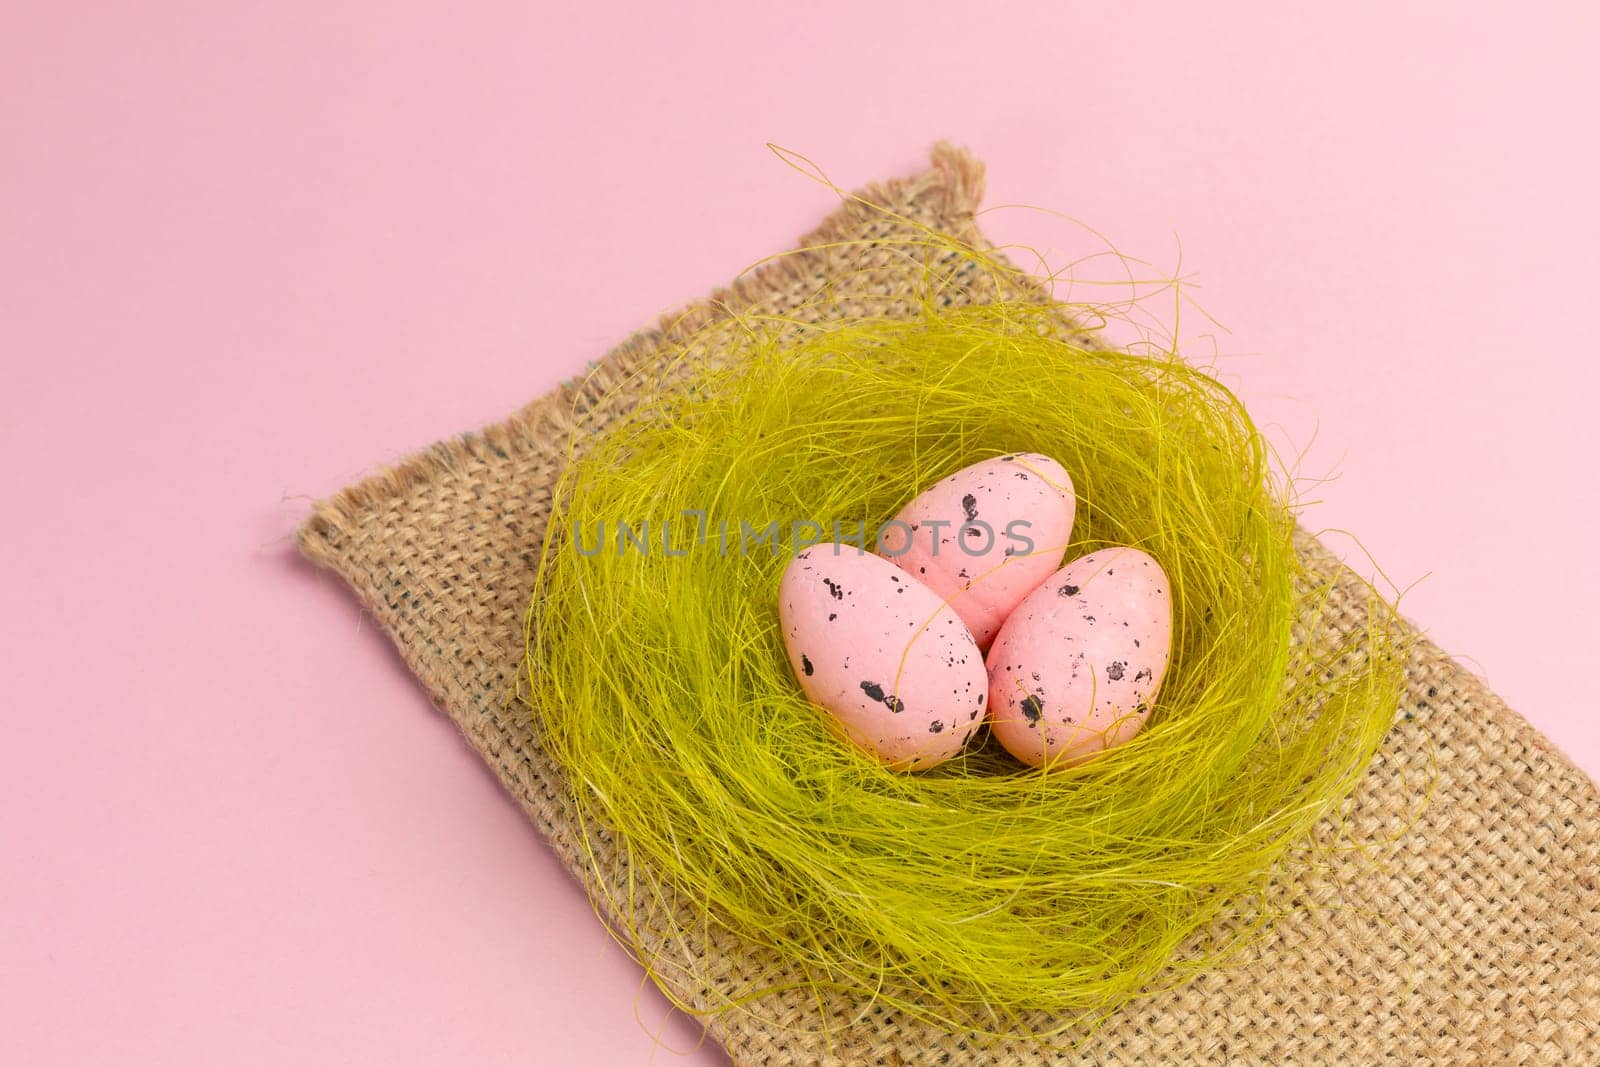 Nest with colored Easter eggs on the sackcloth bag. by mvg6894